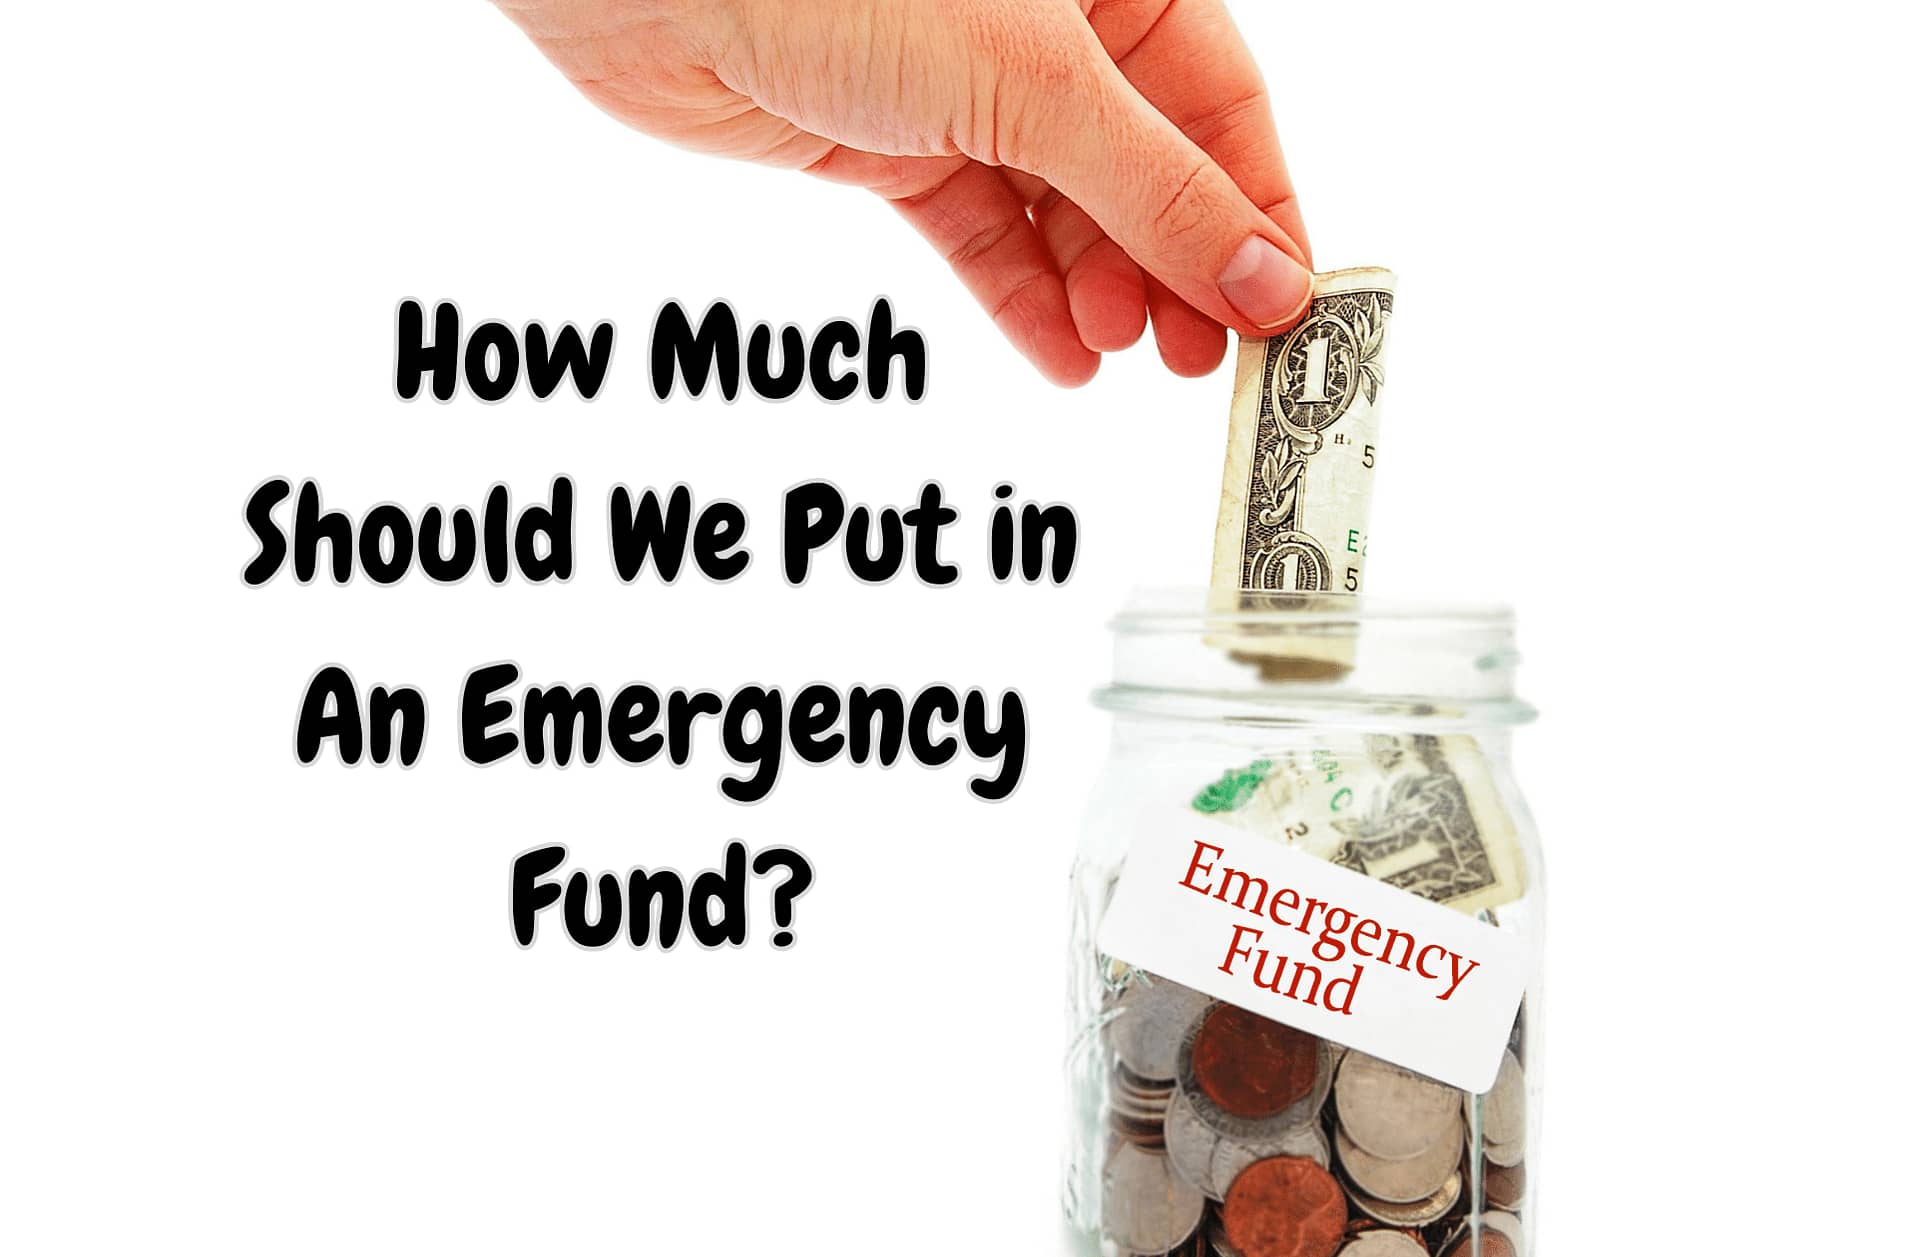 How Much Should We Put in An Emergency Fund